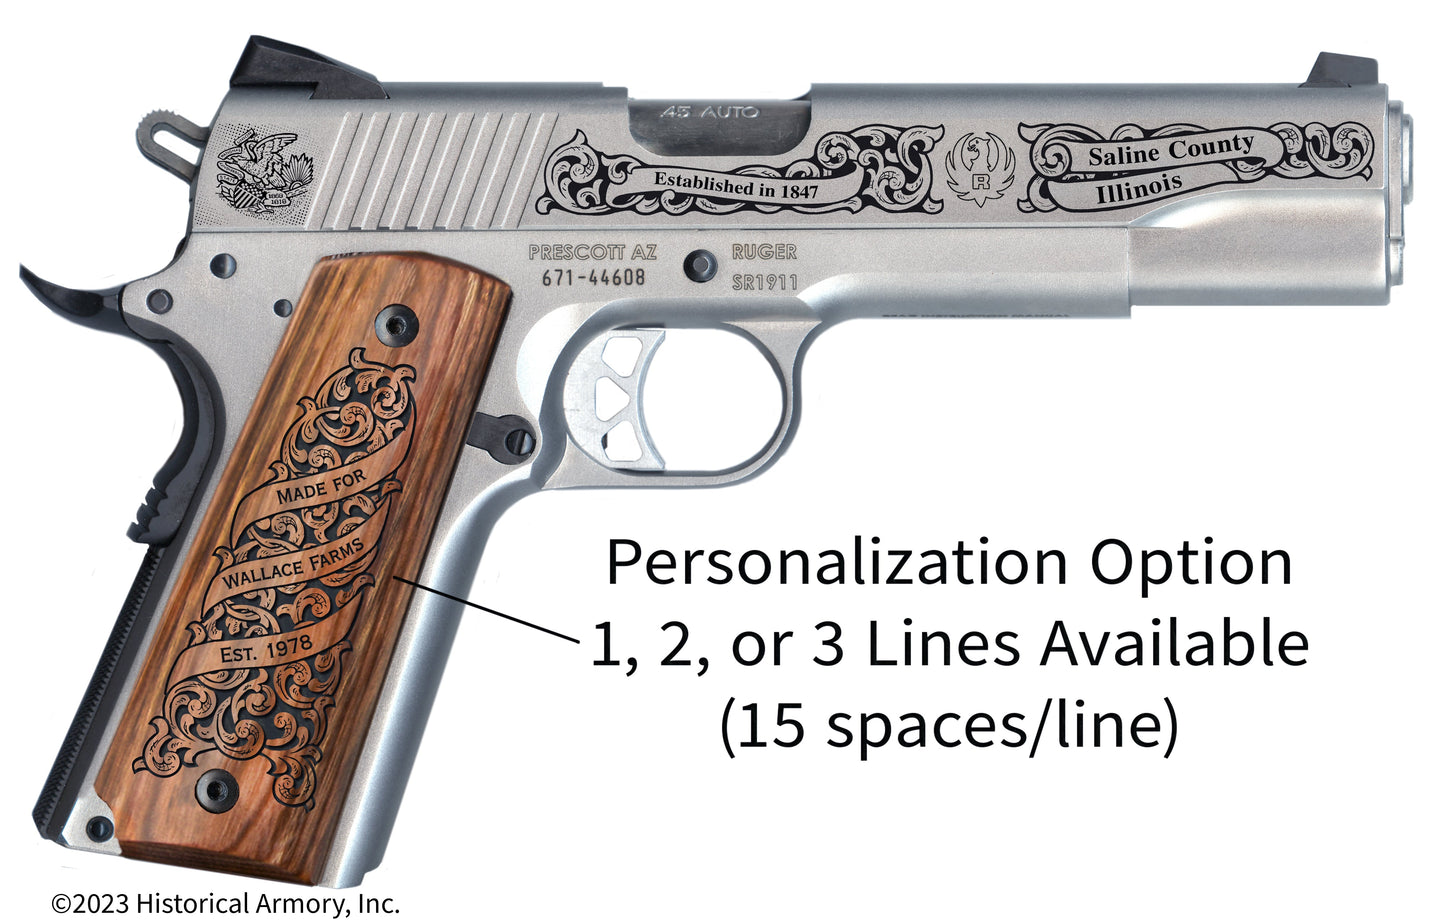 Saline County Illinois Personalized Engraved .45 Auto Ruger 1911